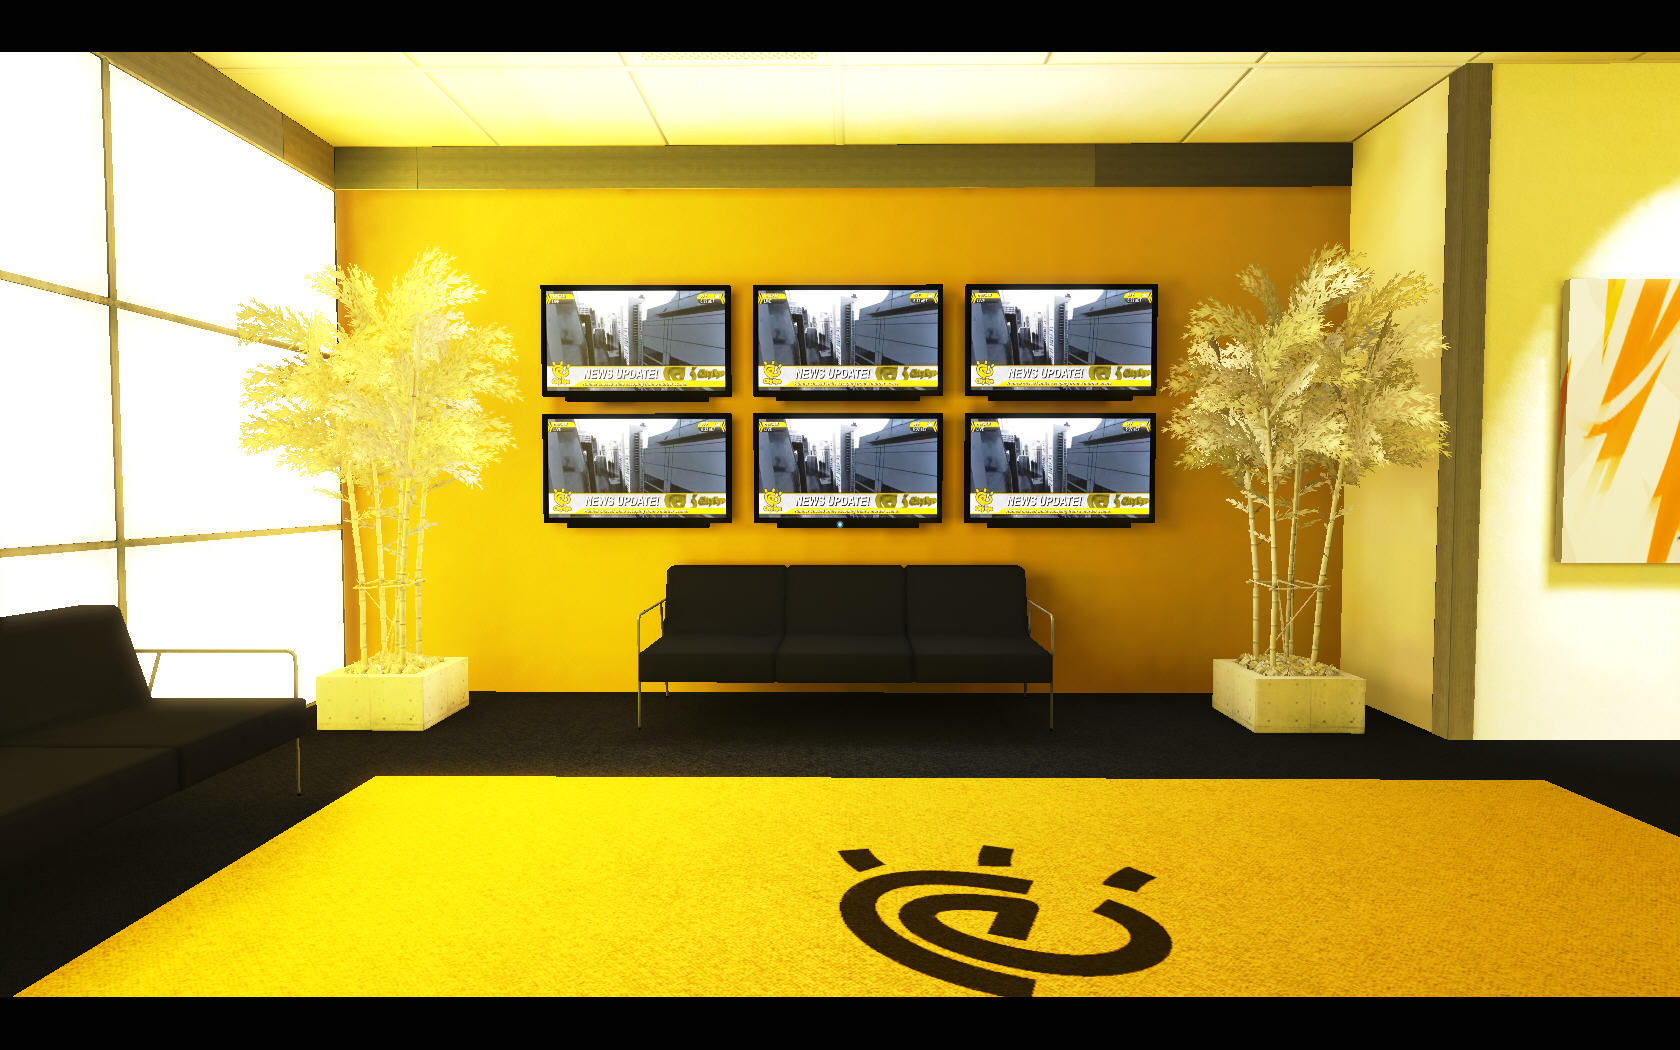 Room with multiple TVs and two unnaturally colored white trees. Room is yellow and black with white ceiling.